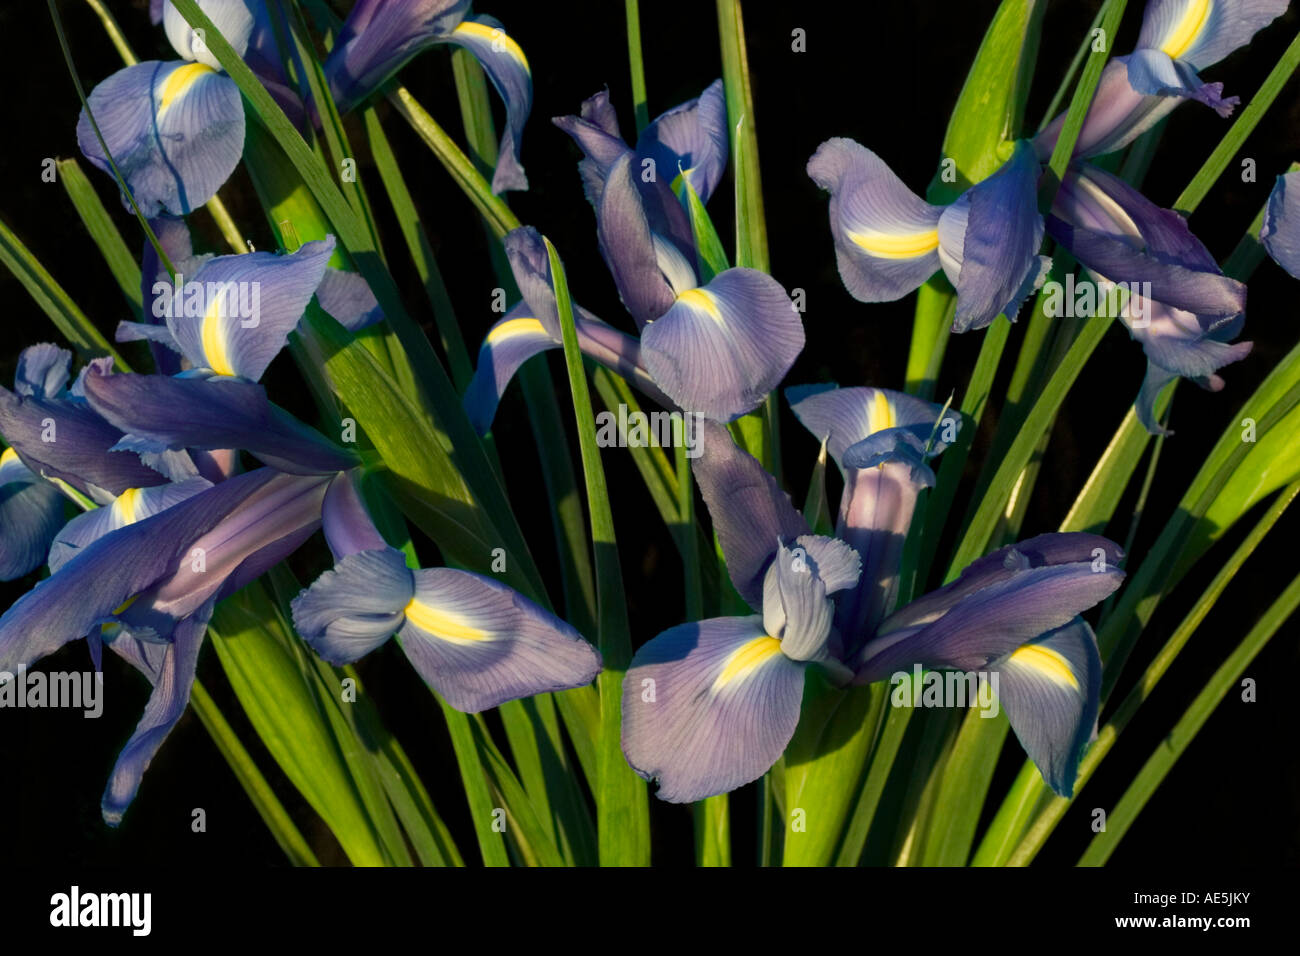 Bunch of iris flowers Iris sisyrinchium with purple and yellow petals and green stems against a black background Stock Photo